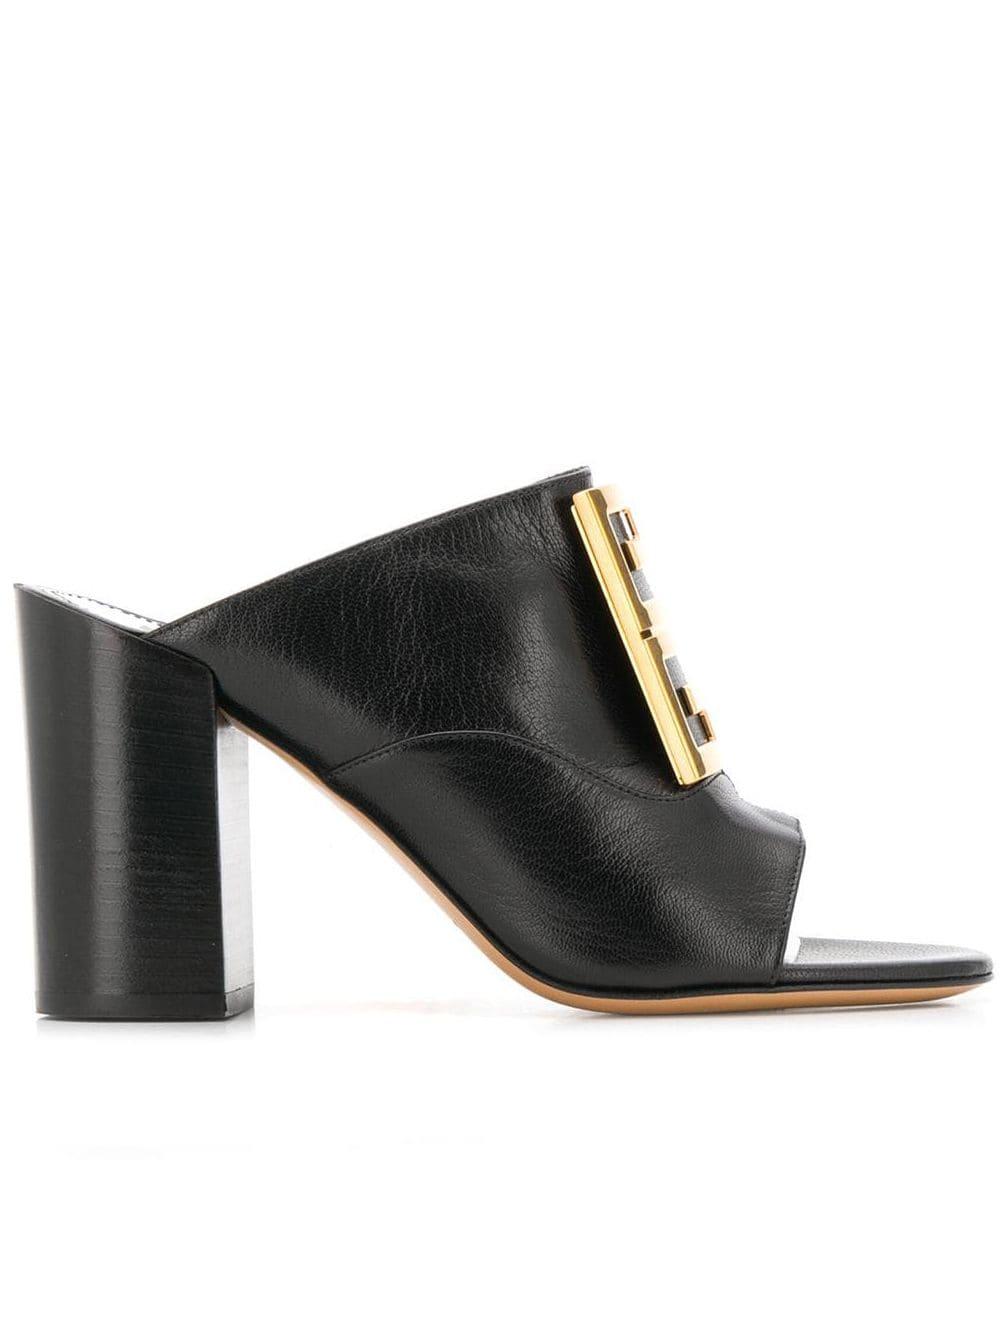 Givenchy Leather 4g Mules in Black - Save 22% - Lyst